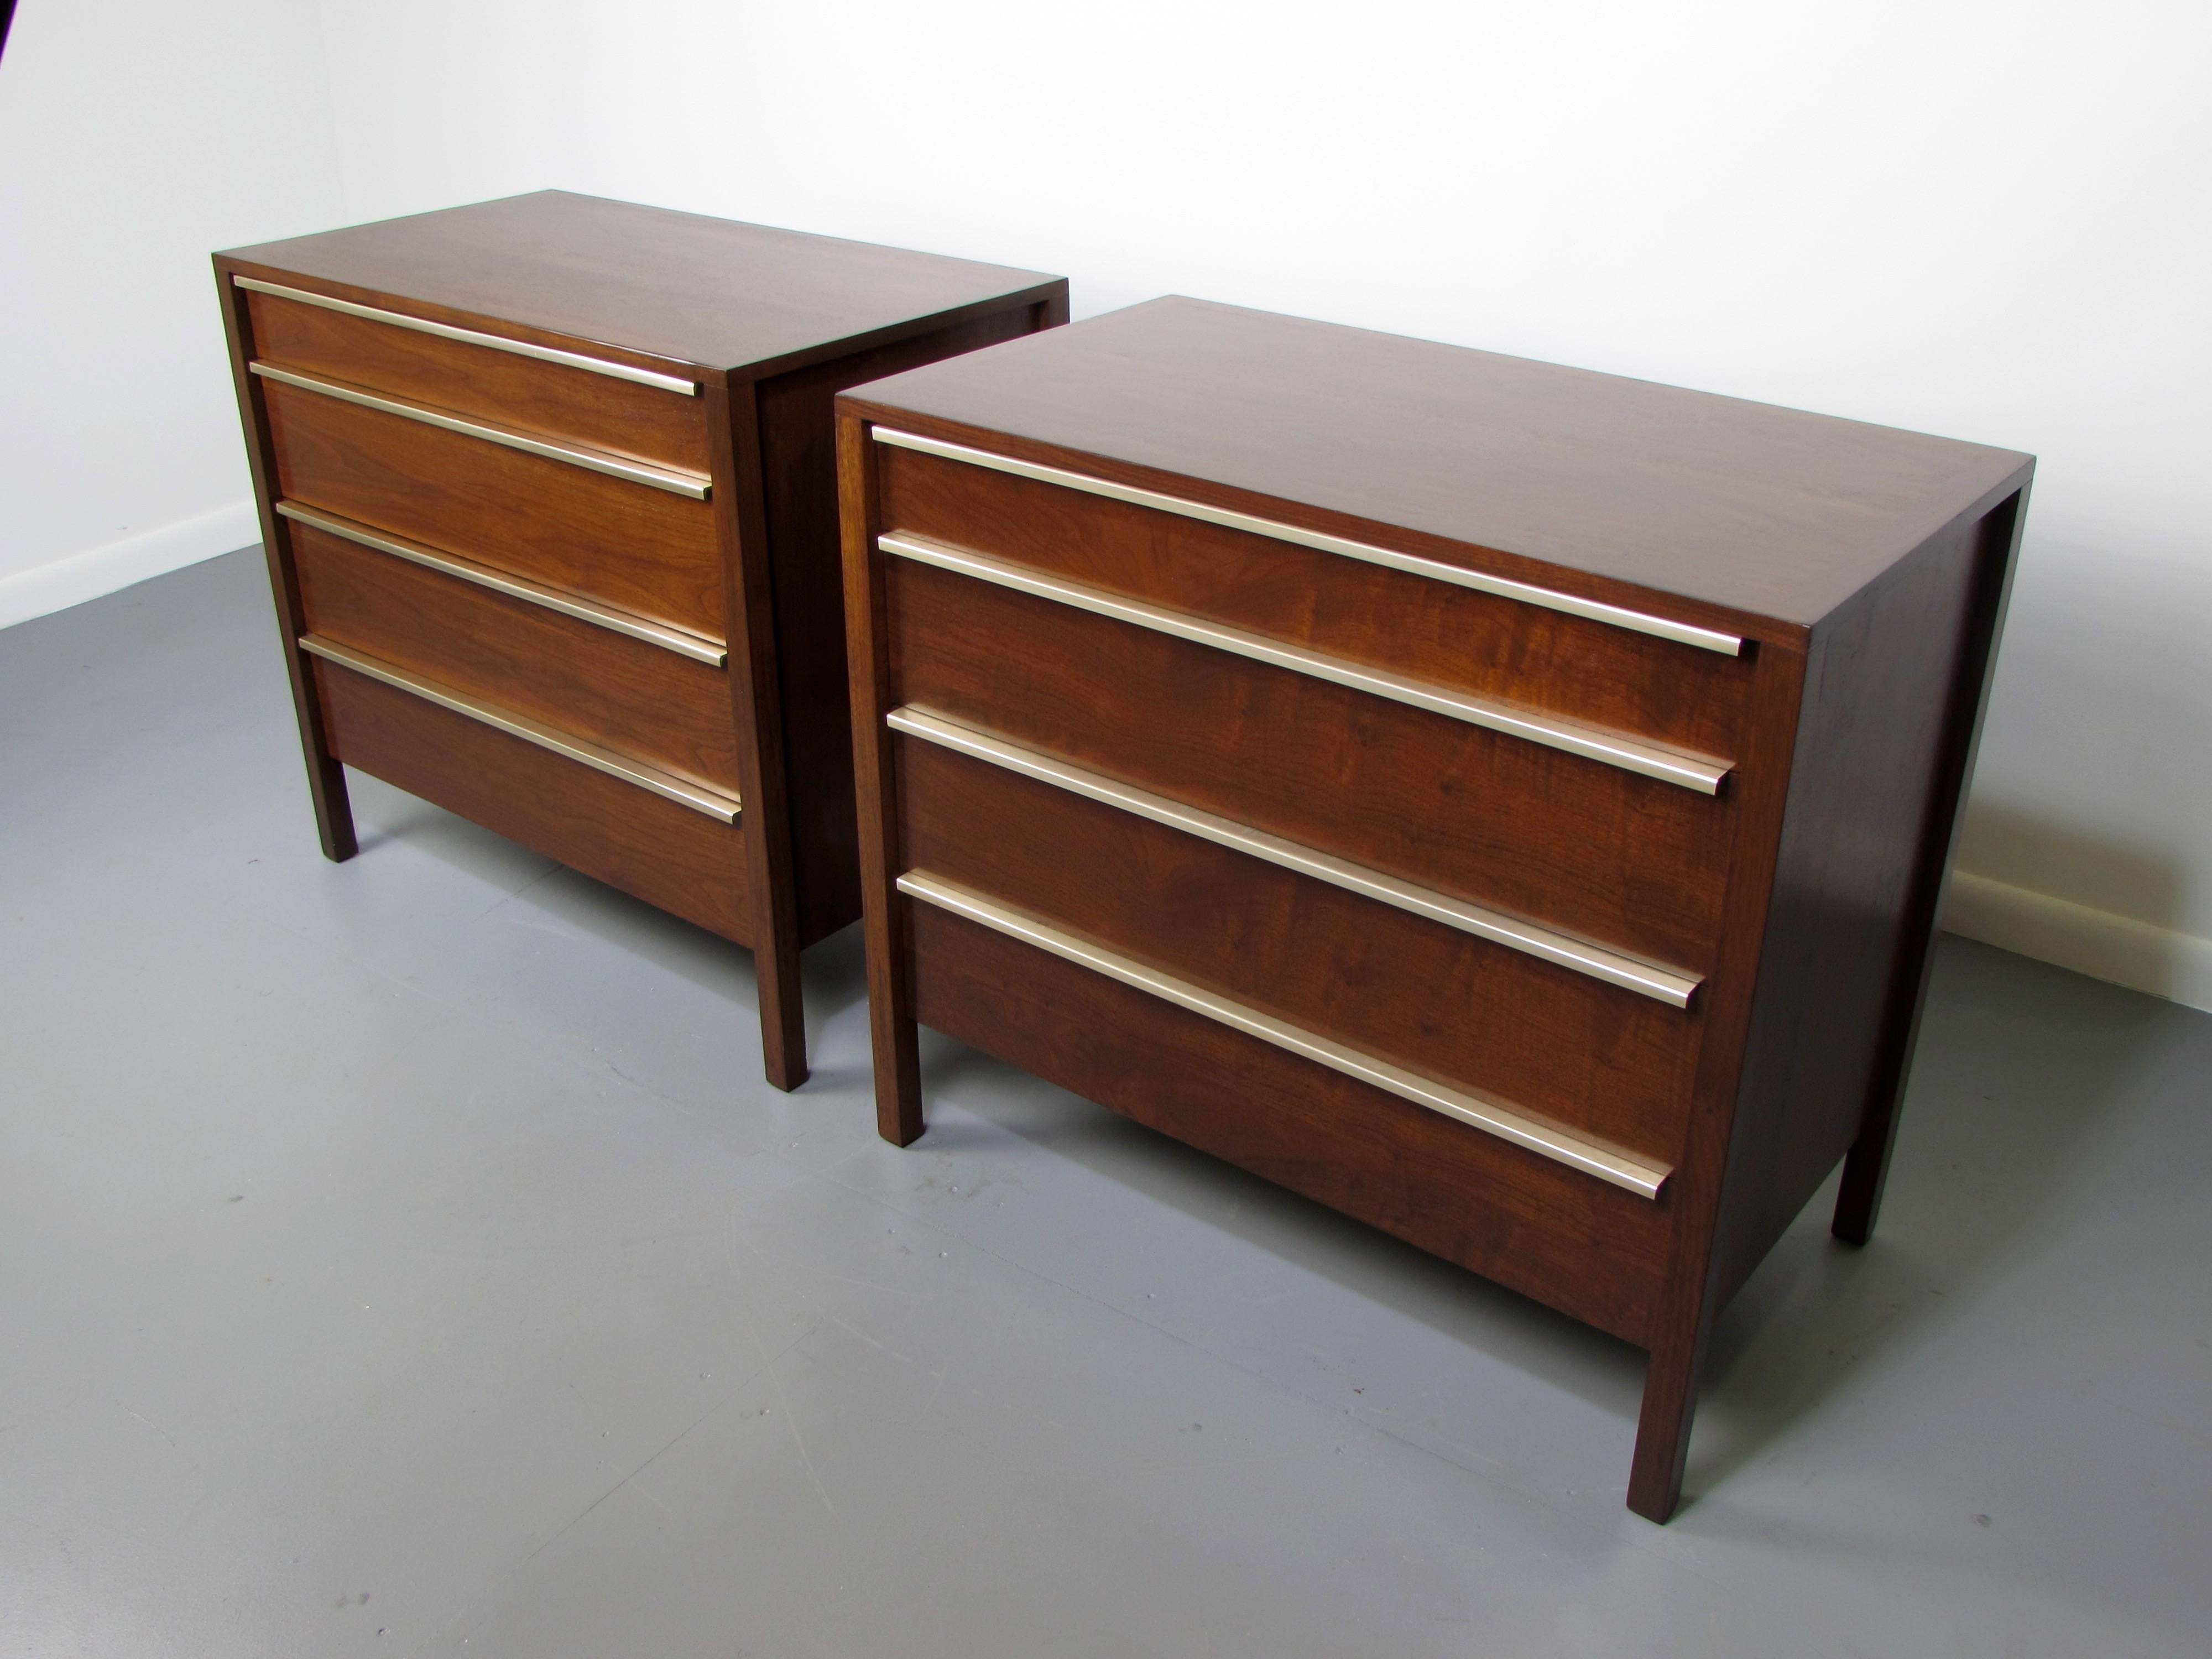 Pair of walnut and aluminum dressers by William Pahlmann, 1952. Fully restored and in excellent condition.

We offer free regular deliveries to NYC and Philadelphia area. Delivery to DC, MD, CT and MA are available if schedule permits, please